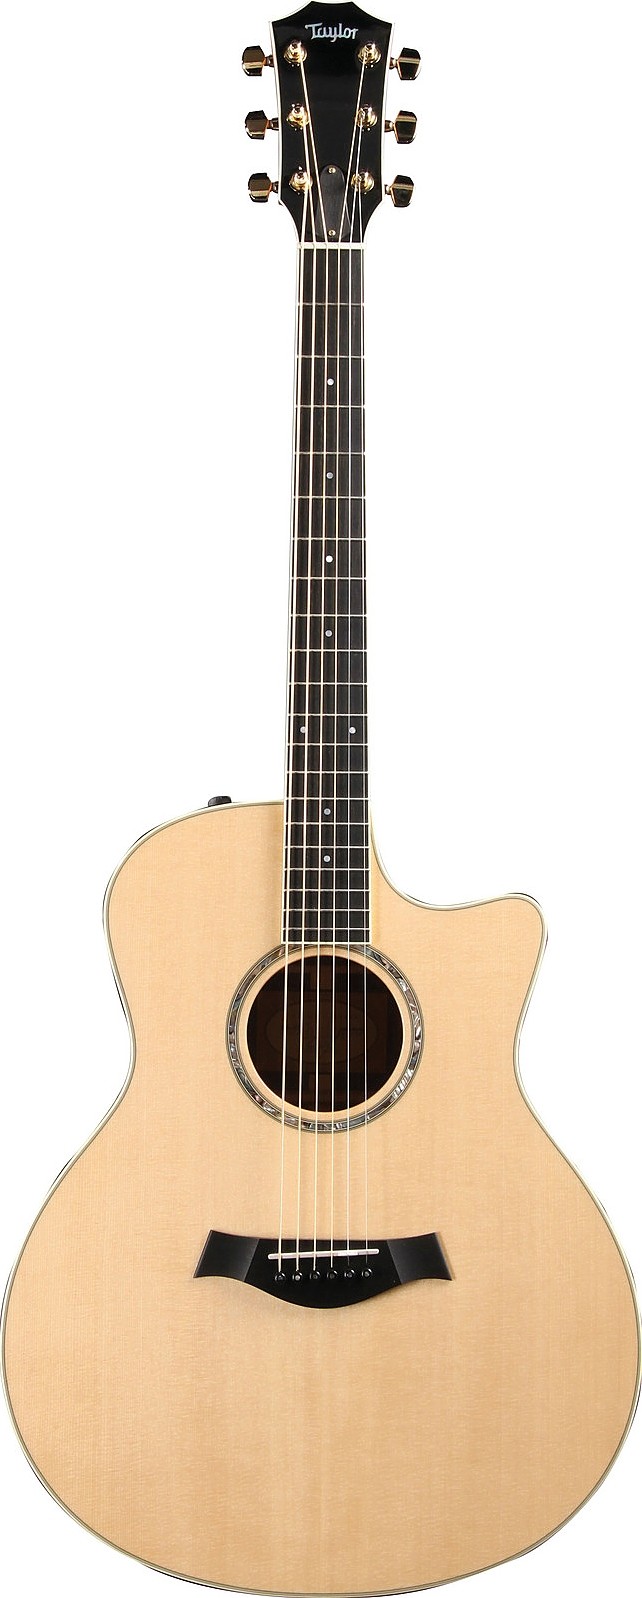 516ce-LTD (Spring 2010 Limited Blackwood 500 Series) by Taylor